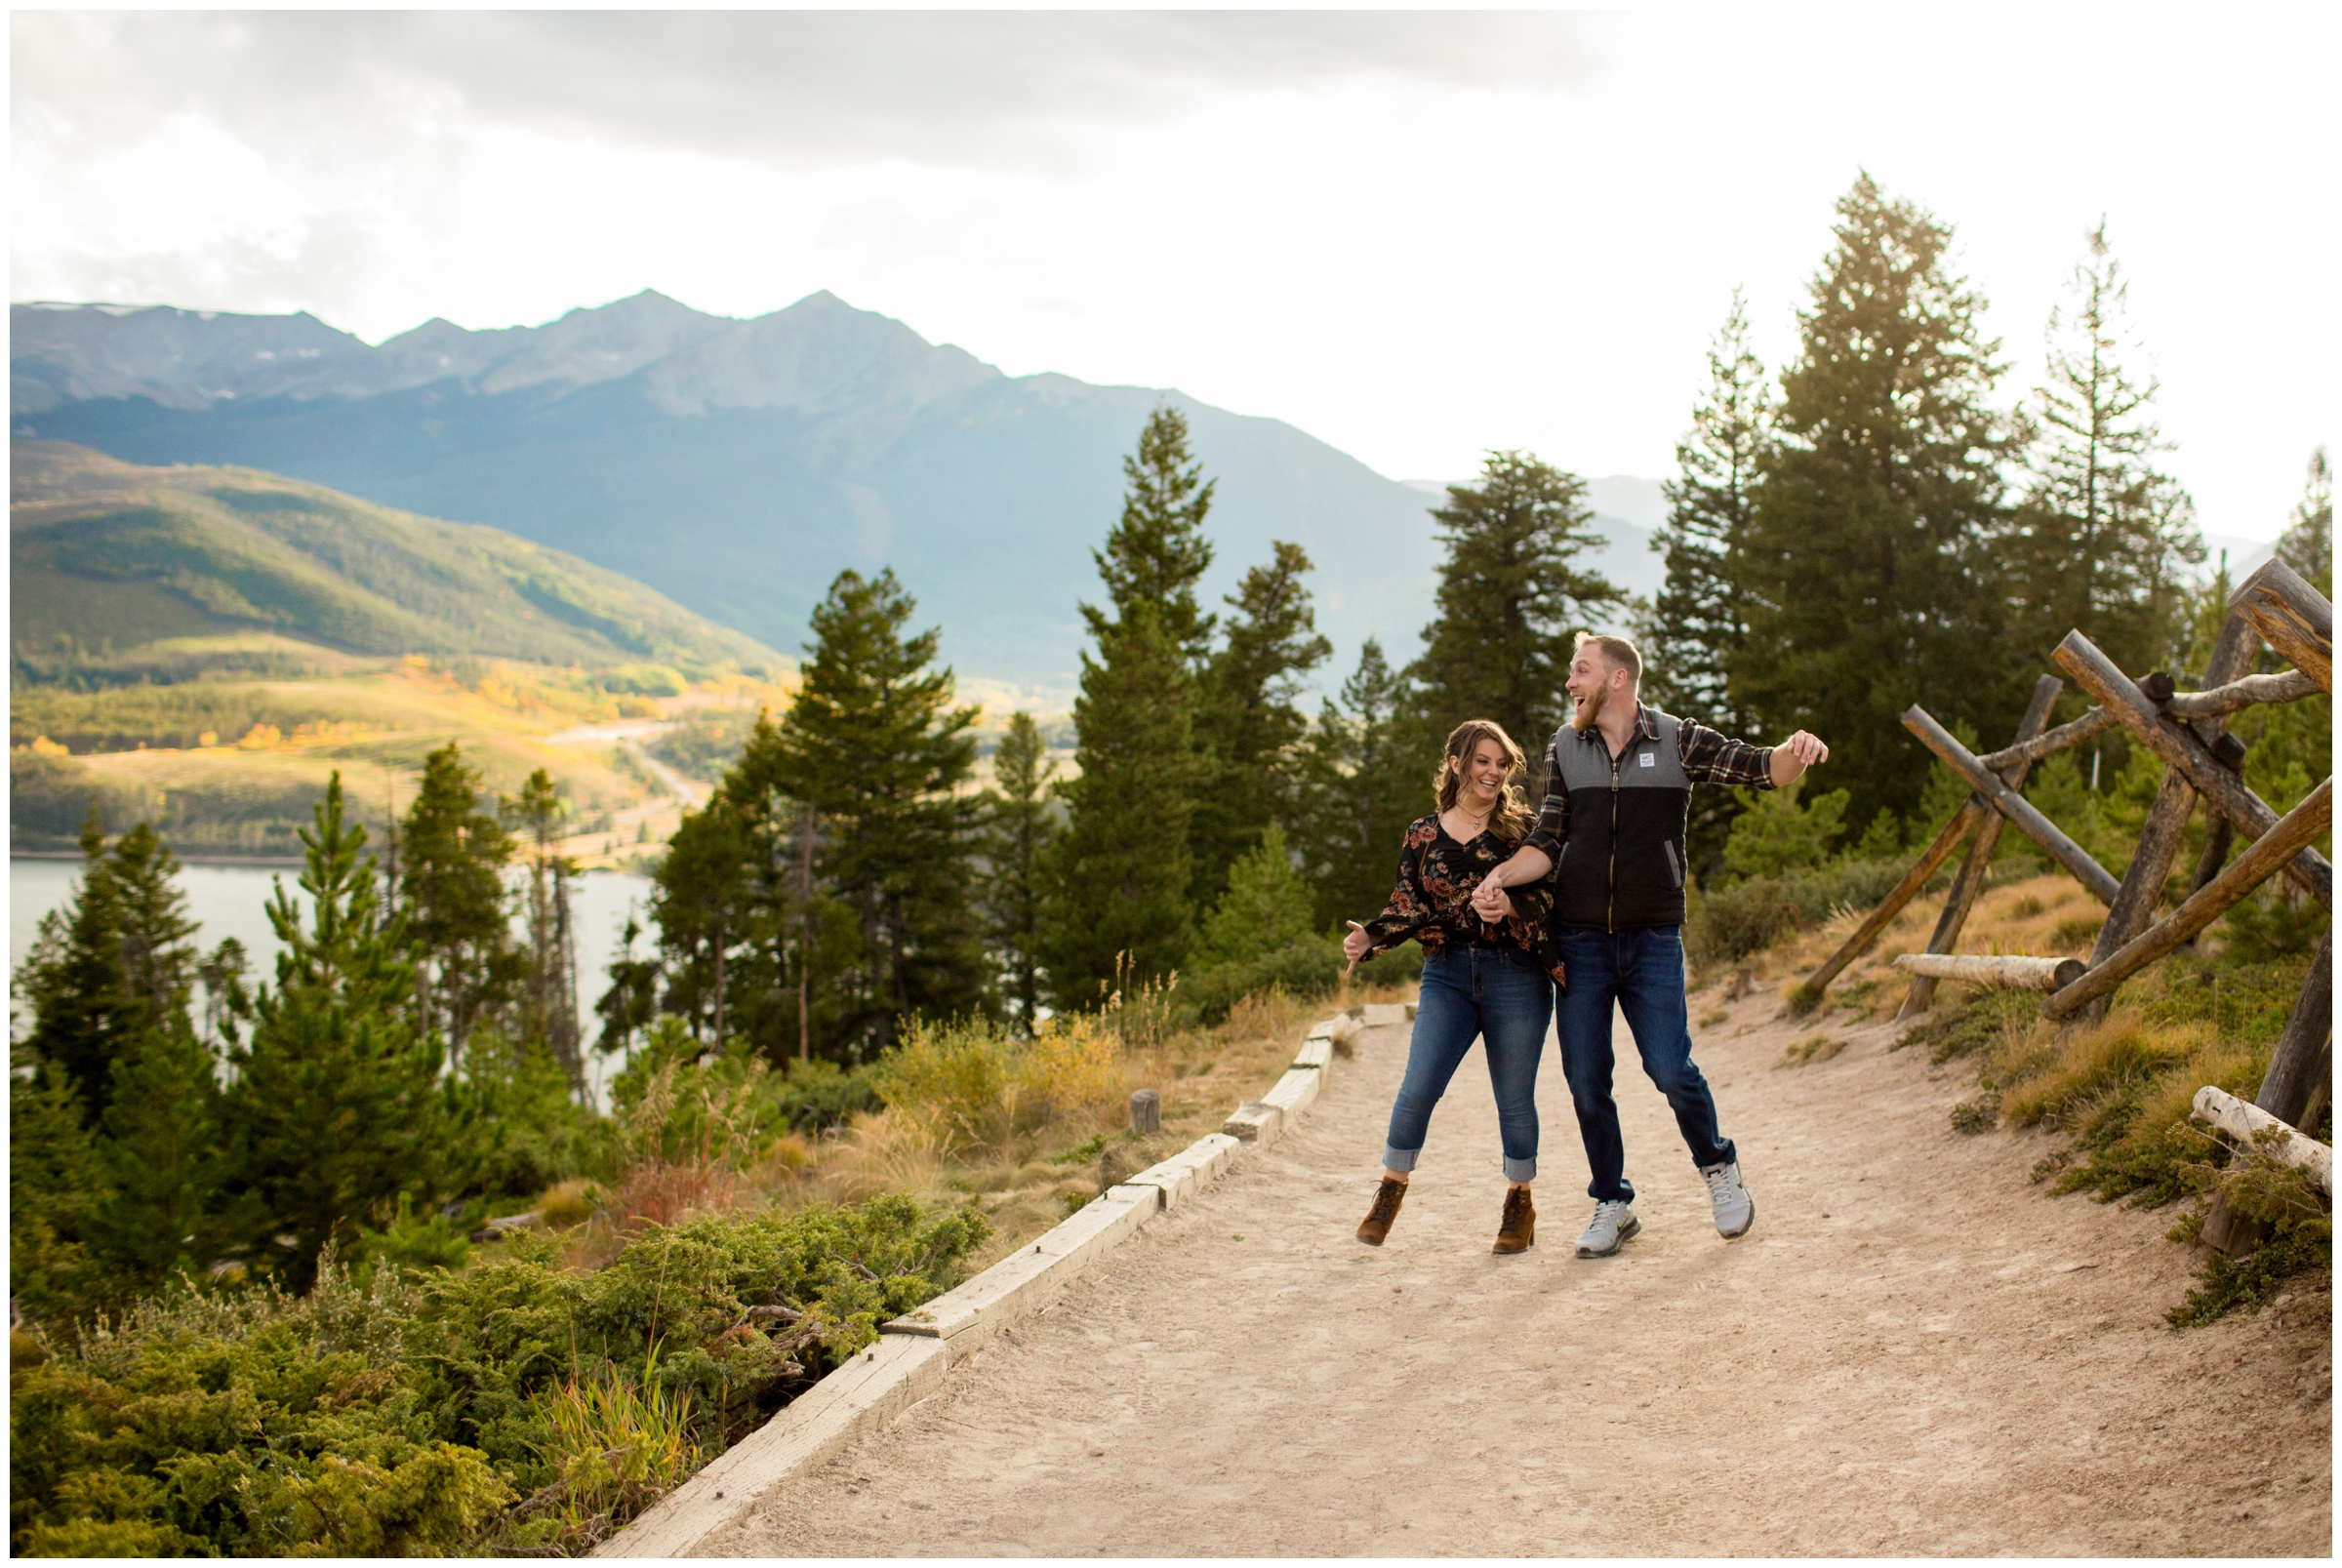 Fall Breckenridge Colorado engagement photos at Sapphire Point and Windy Point Campground by mountain photographer Plum Pretty Photography